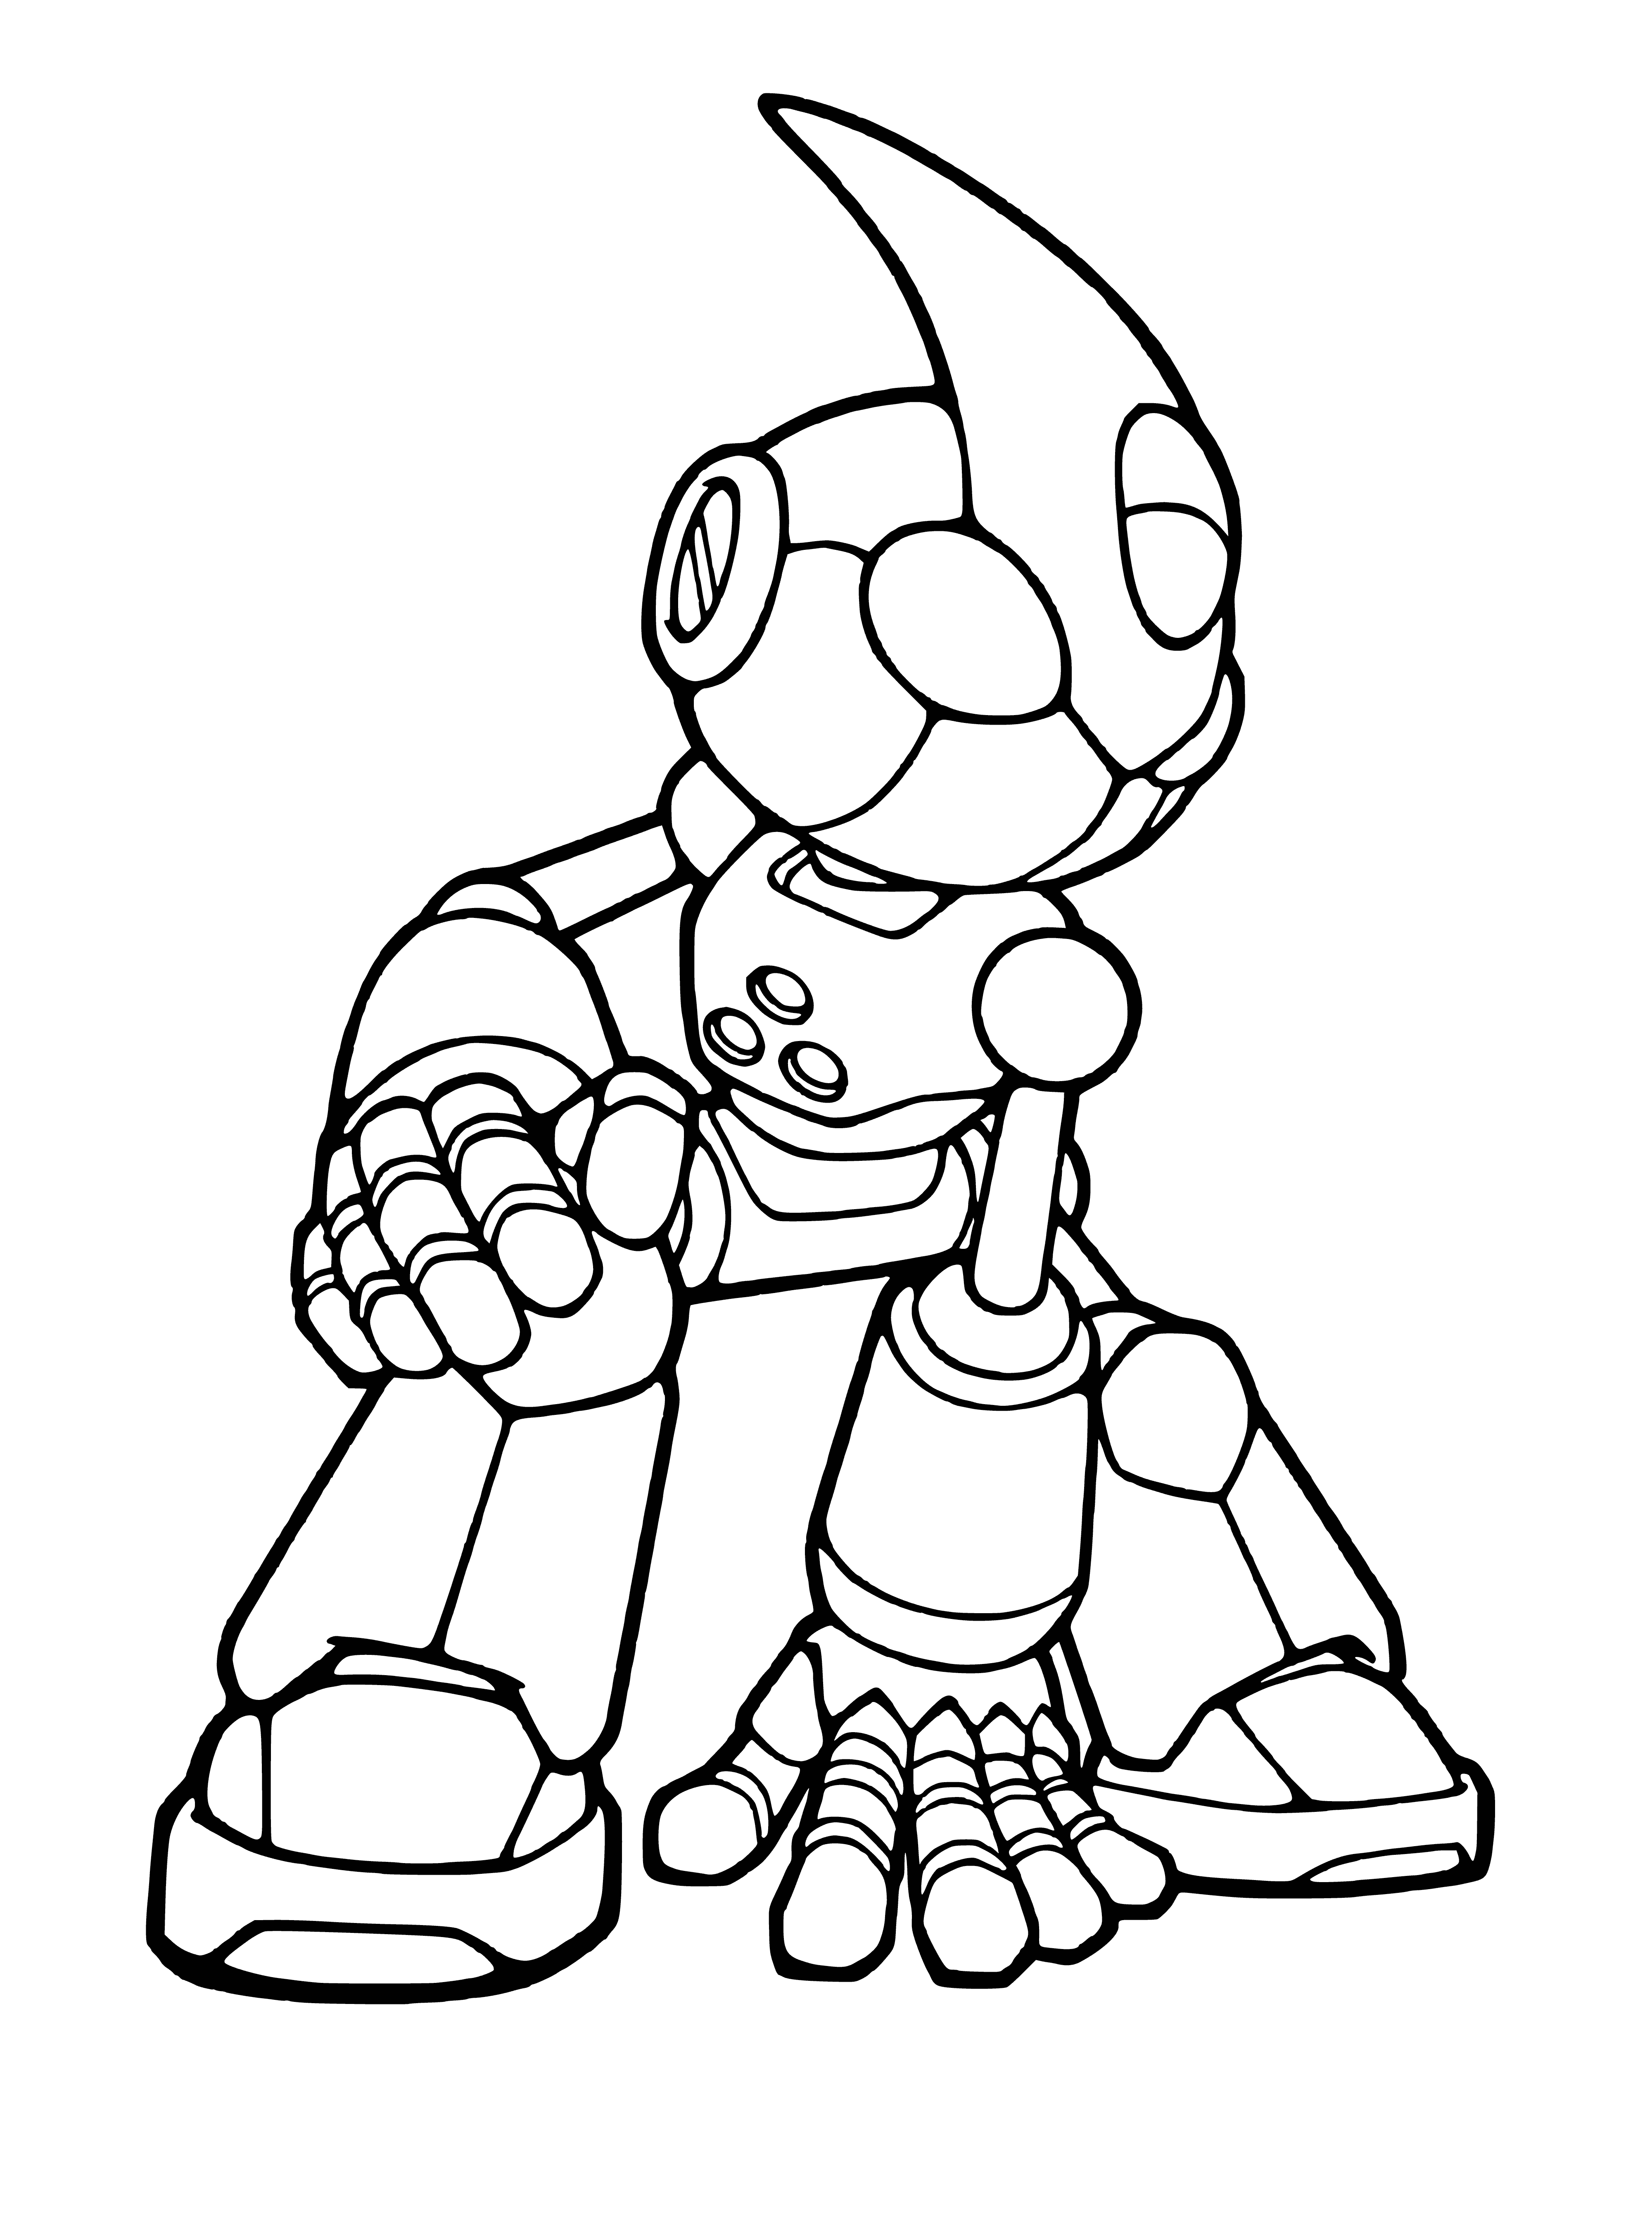 Emerl coloring page